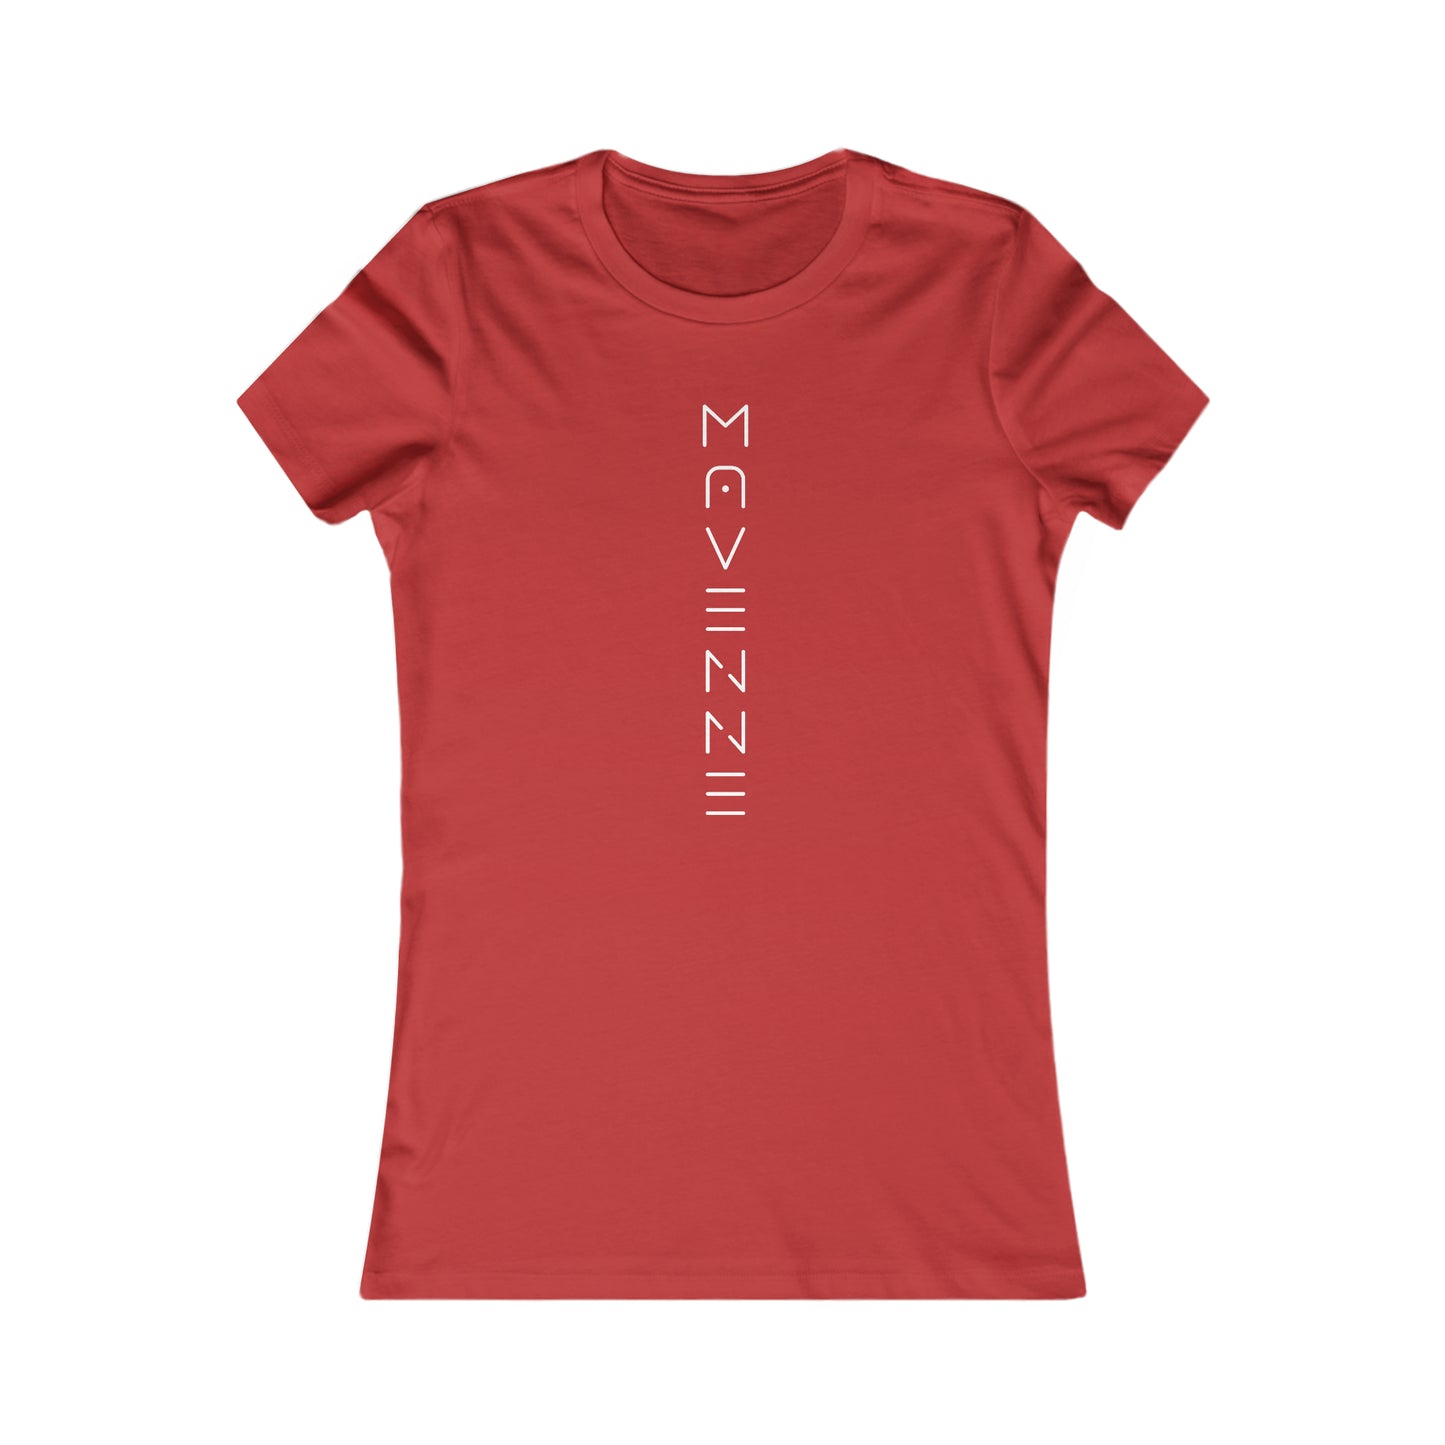 Ladies' cut Sci-fi Tee (click to select your color)